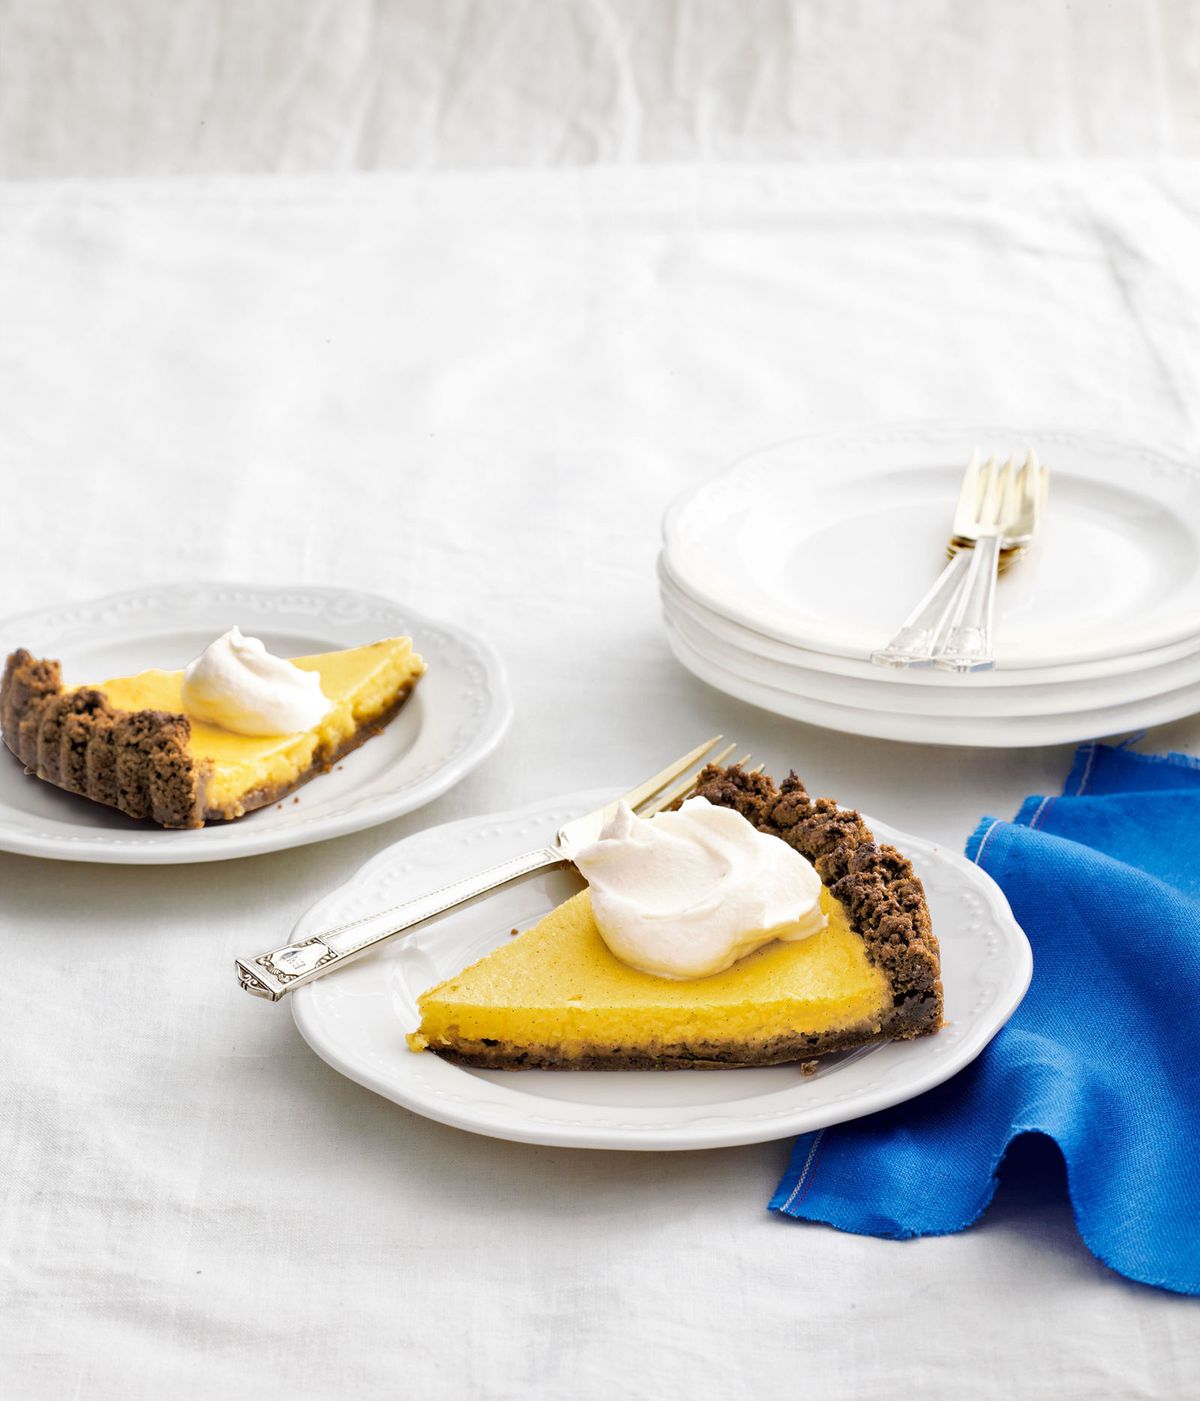 meyer lemon tart with gingersnap crust and almond whipped cream